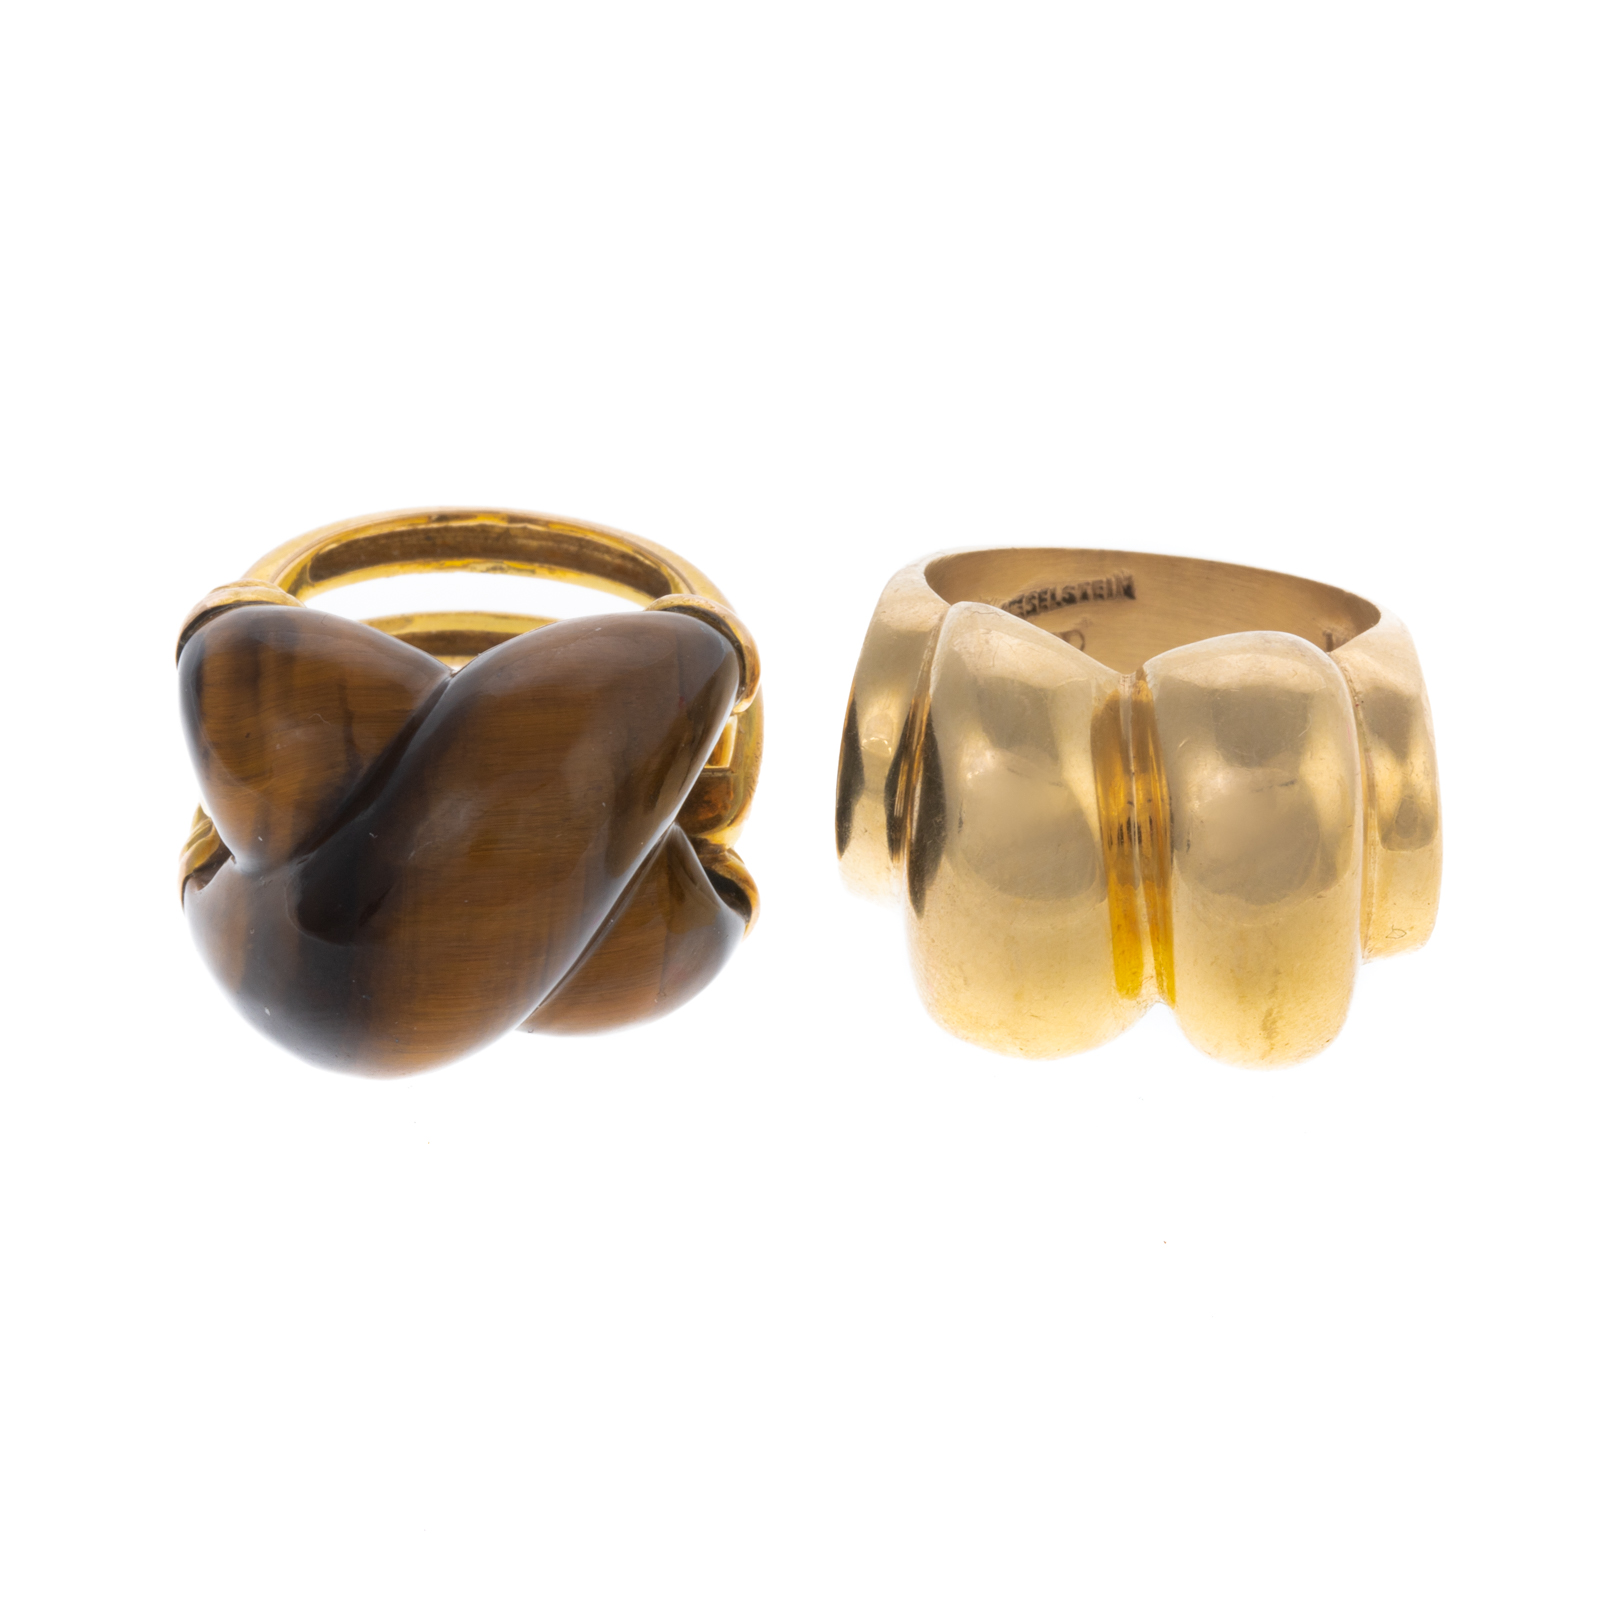 TWO BOLD RINGS IN 14K YELLOW GOLD 3385d1